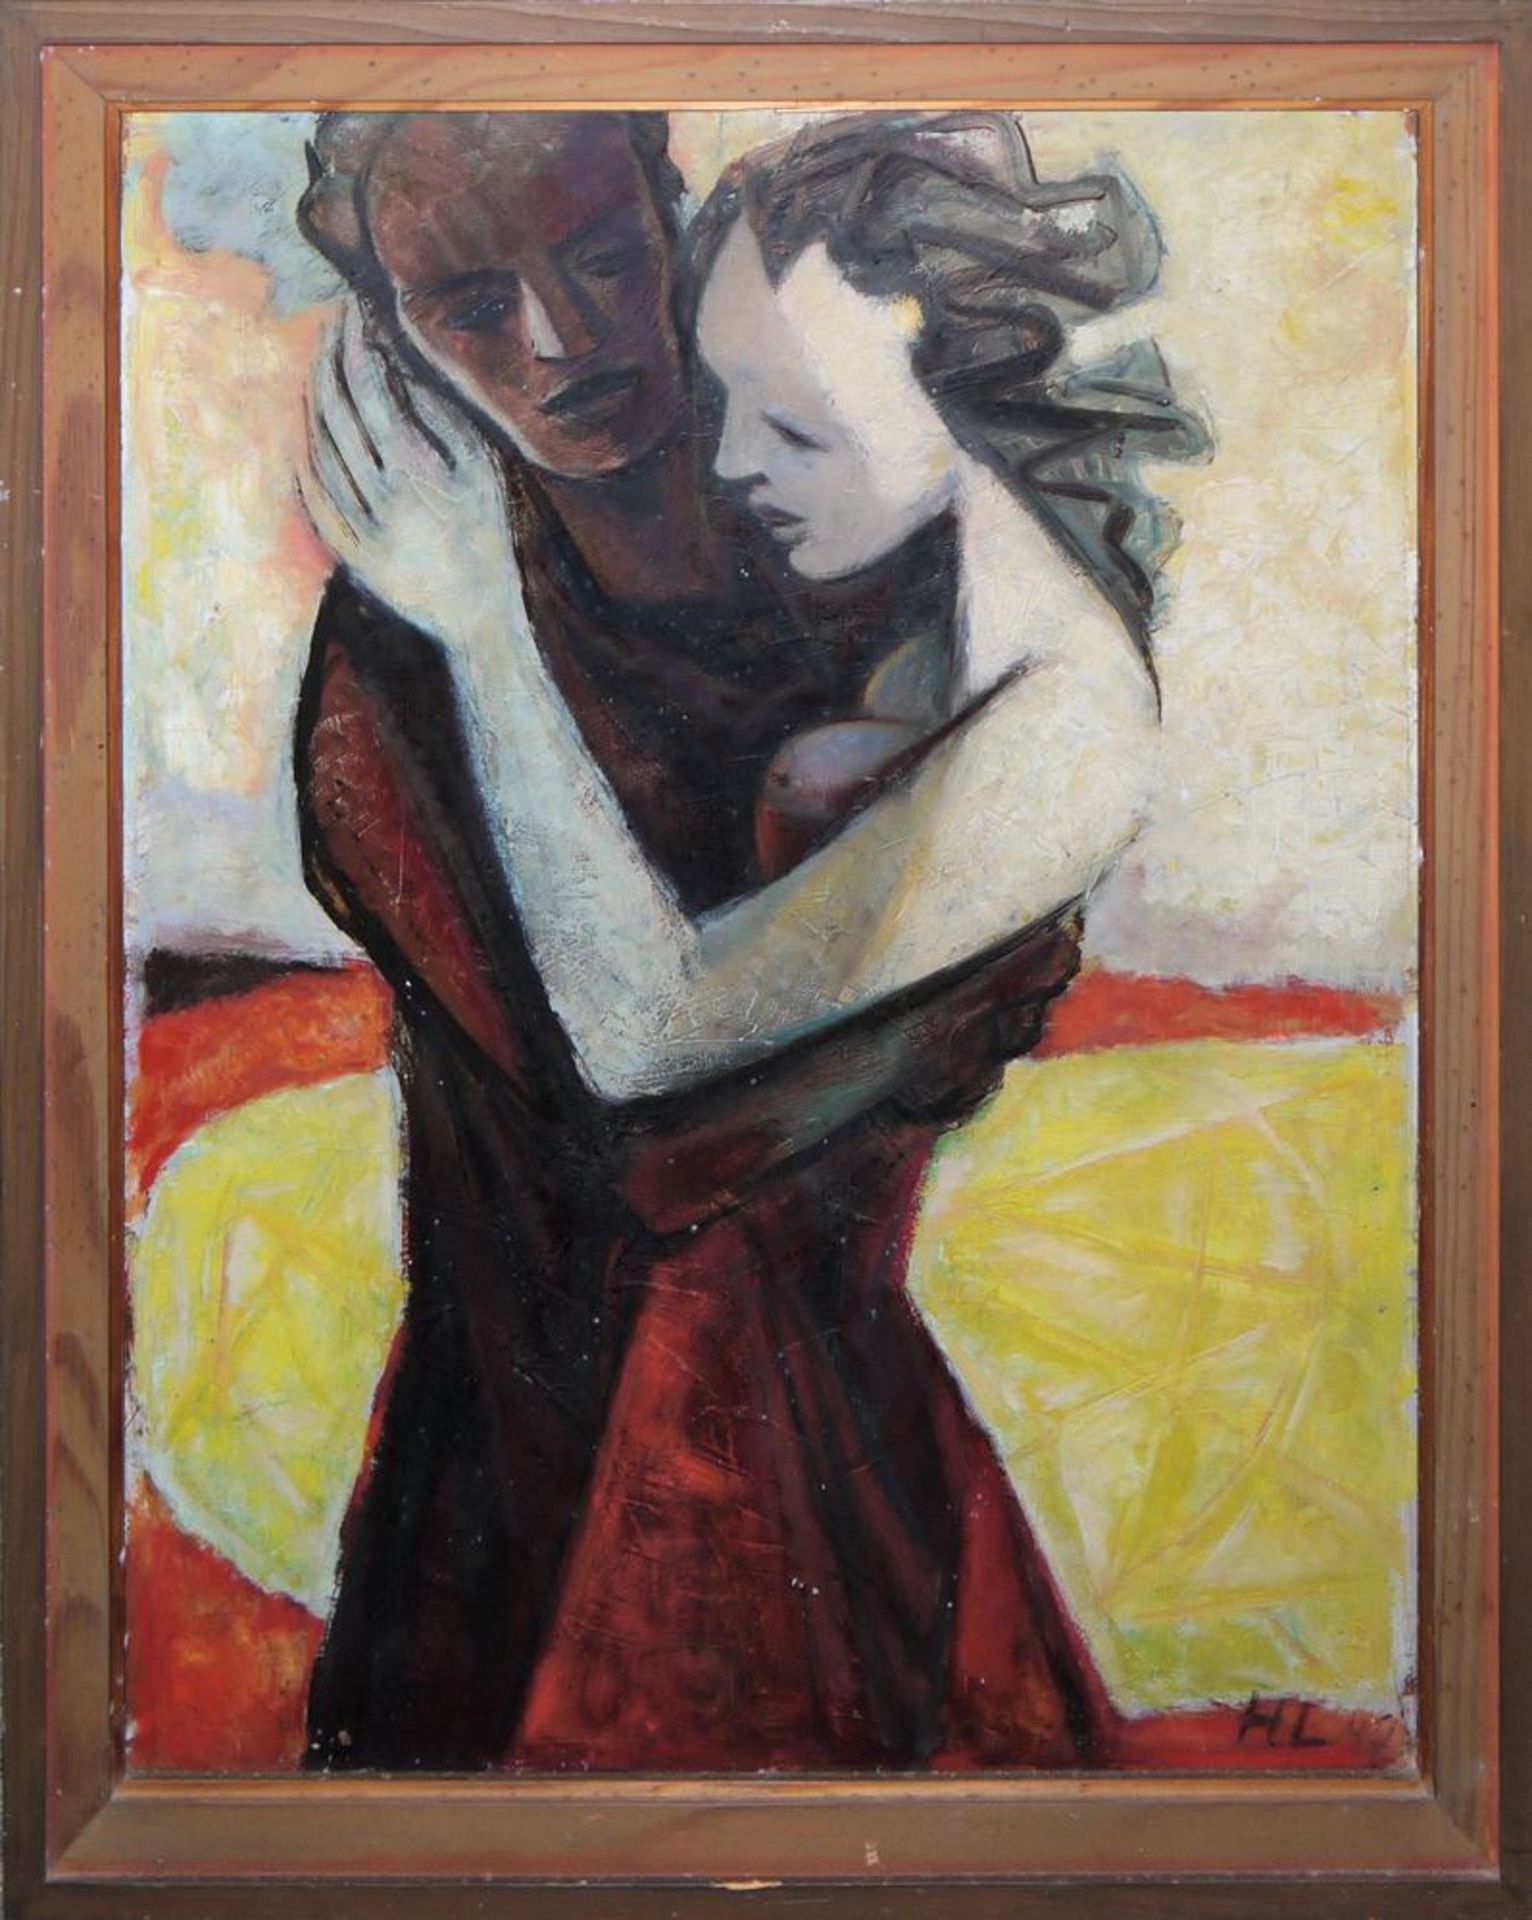 Heinz Lohmar, Couple, monogrammed oil painting from 1947, framed - Image 2 of 4